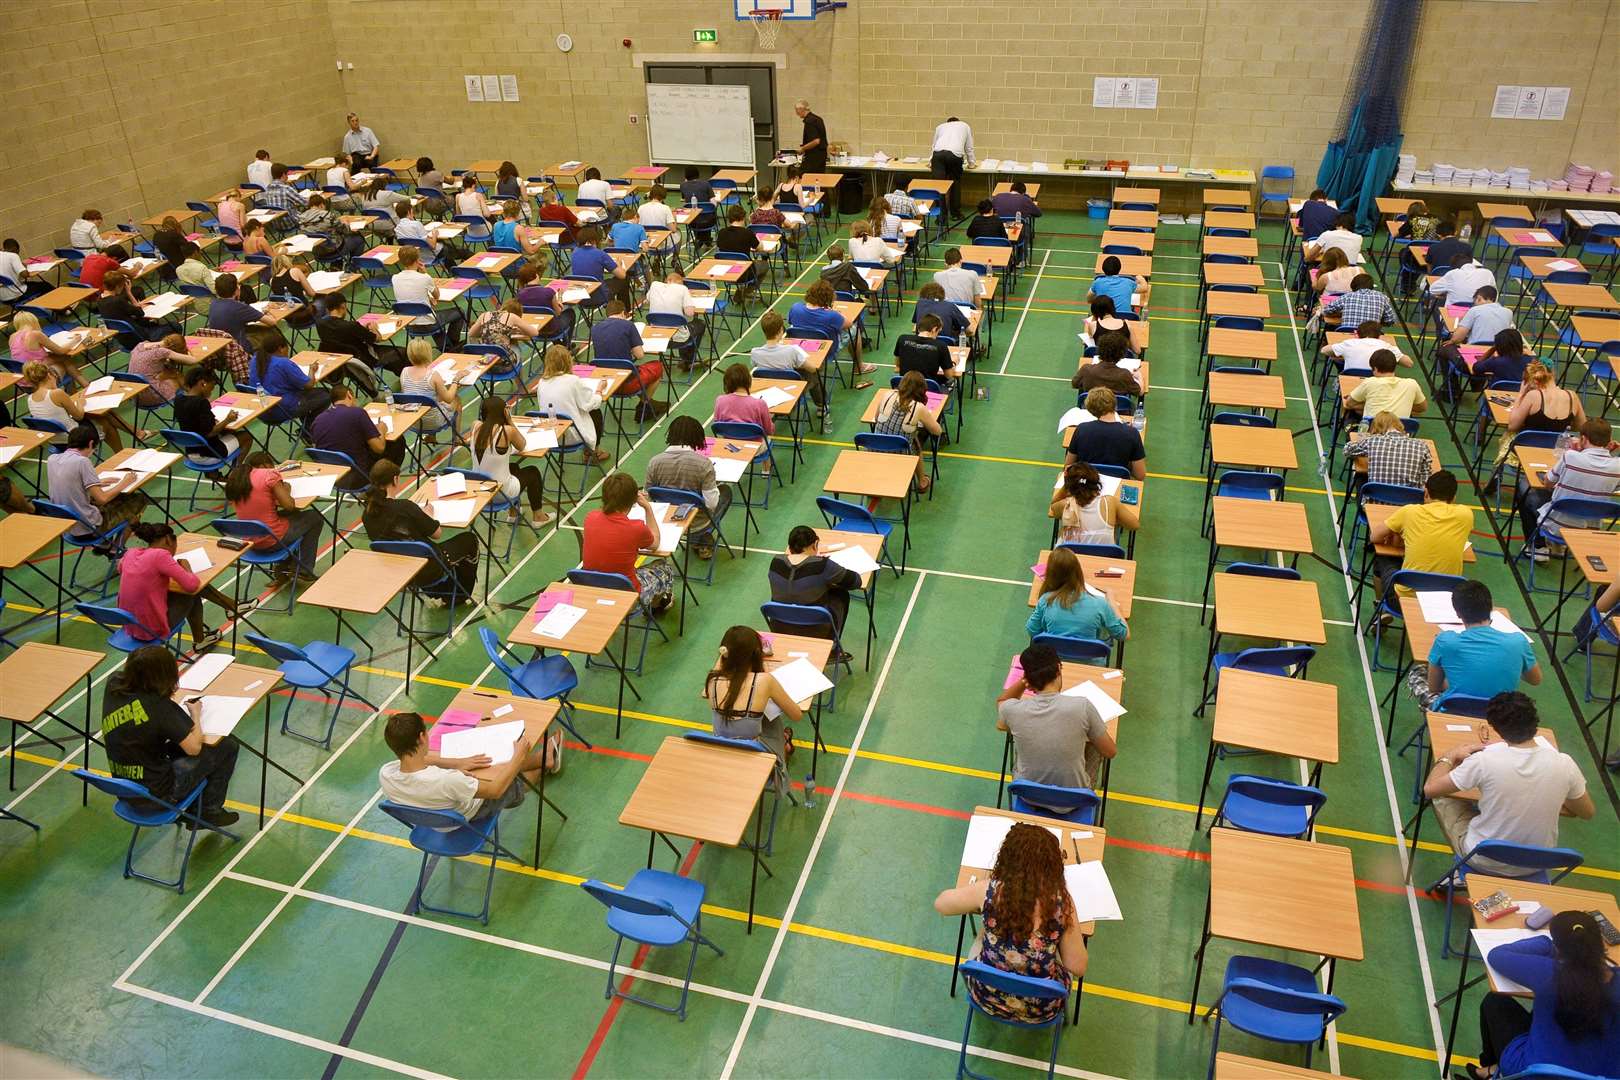 More than 100,000 pupils due to receive exam results across Scotland